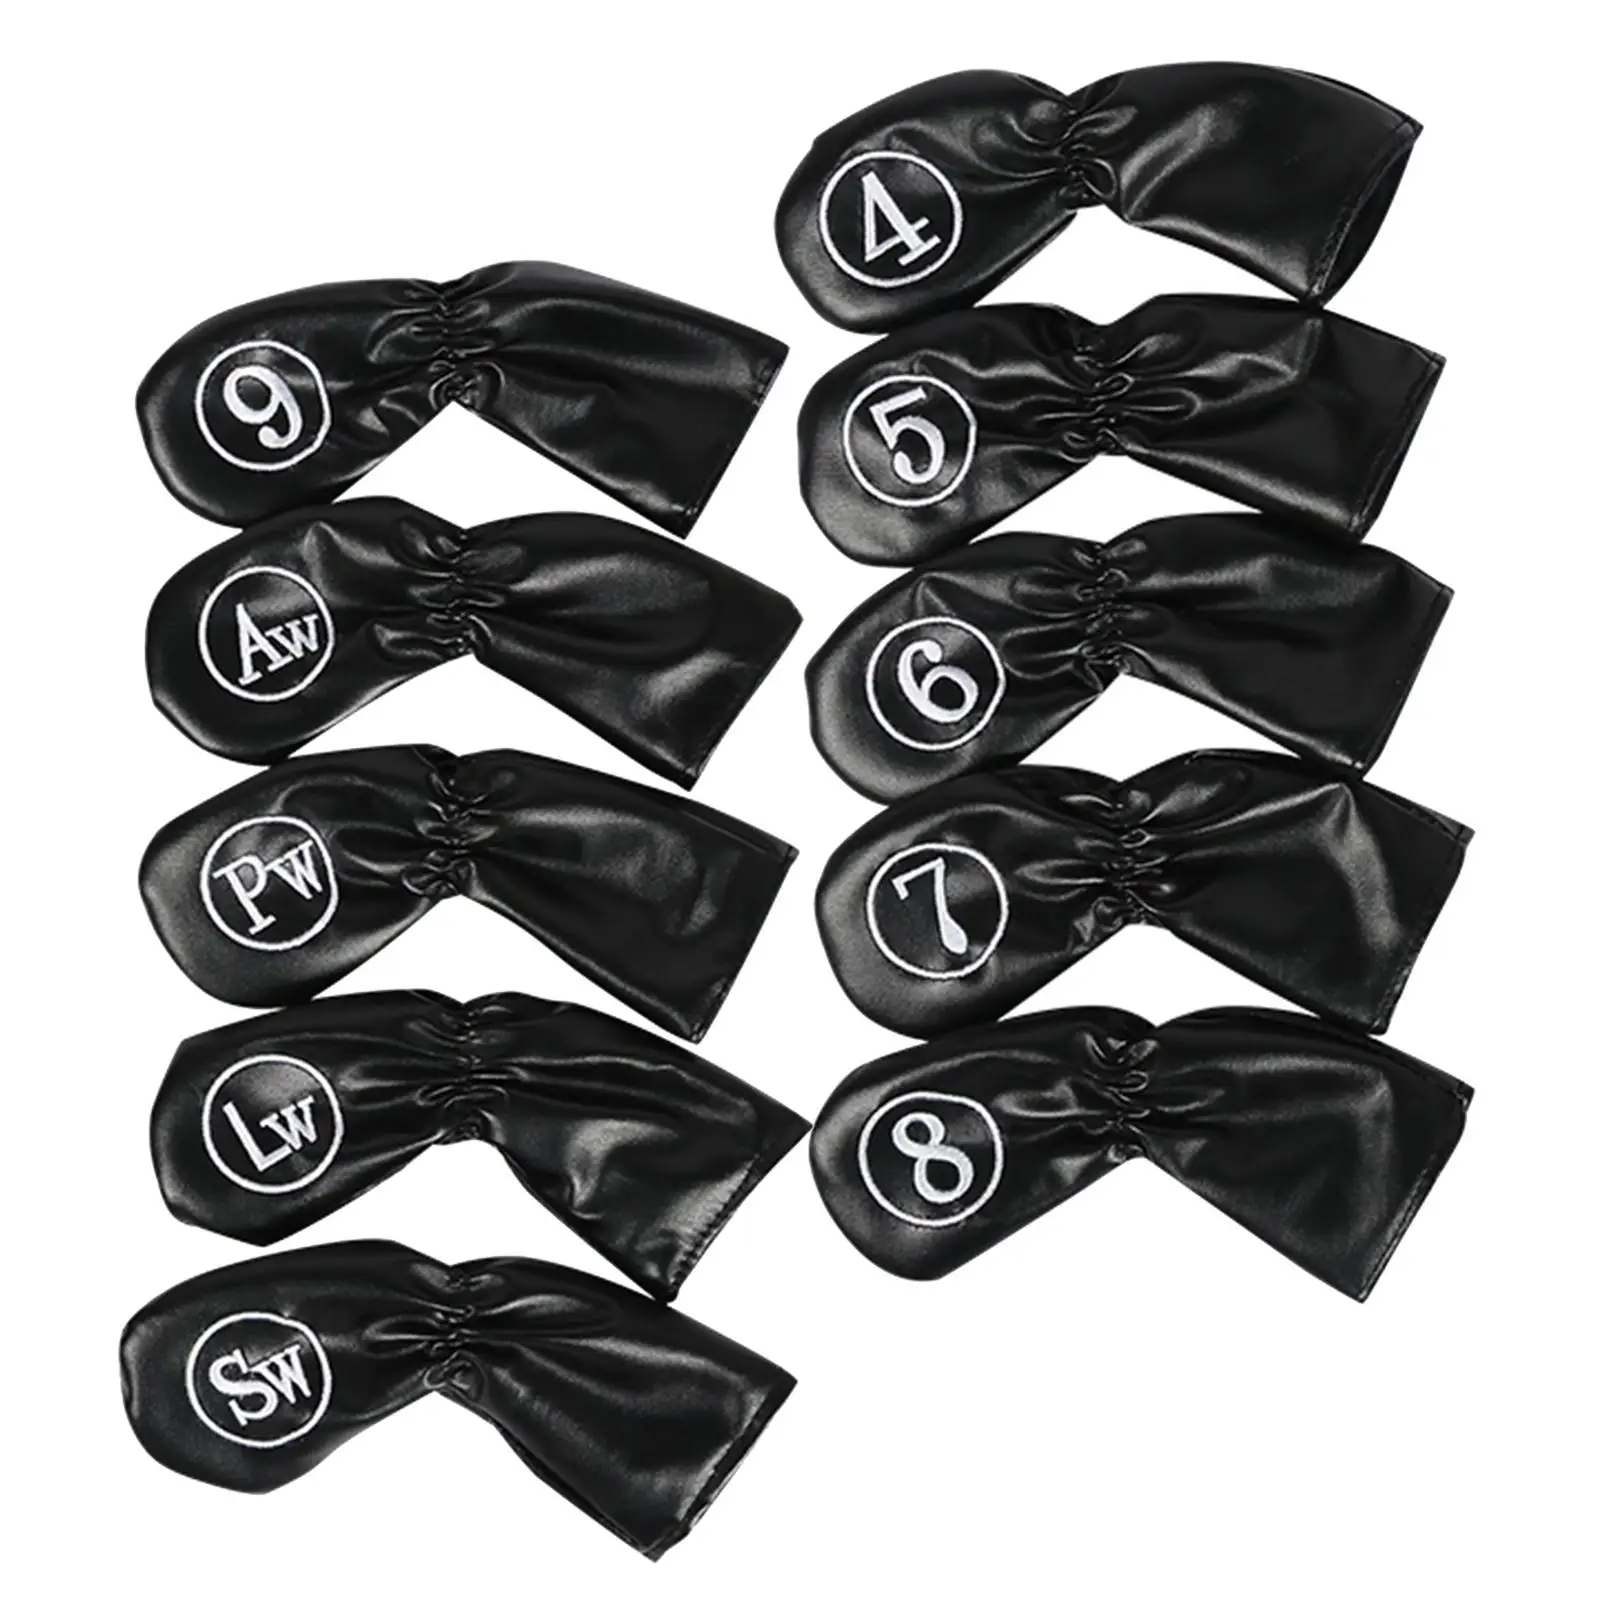 

10Pcs Golf Iron Covers Set with Number Tags Protector Head Protector Golf Club Head Covers for Golfers Golfer Most Irons Head